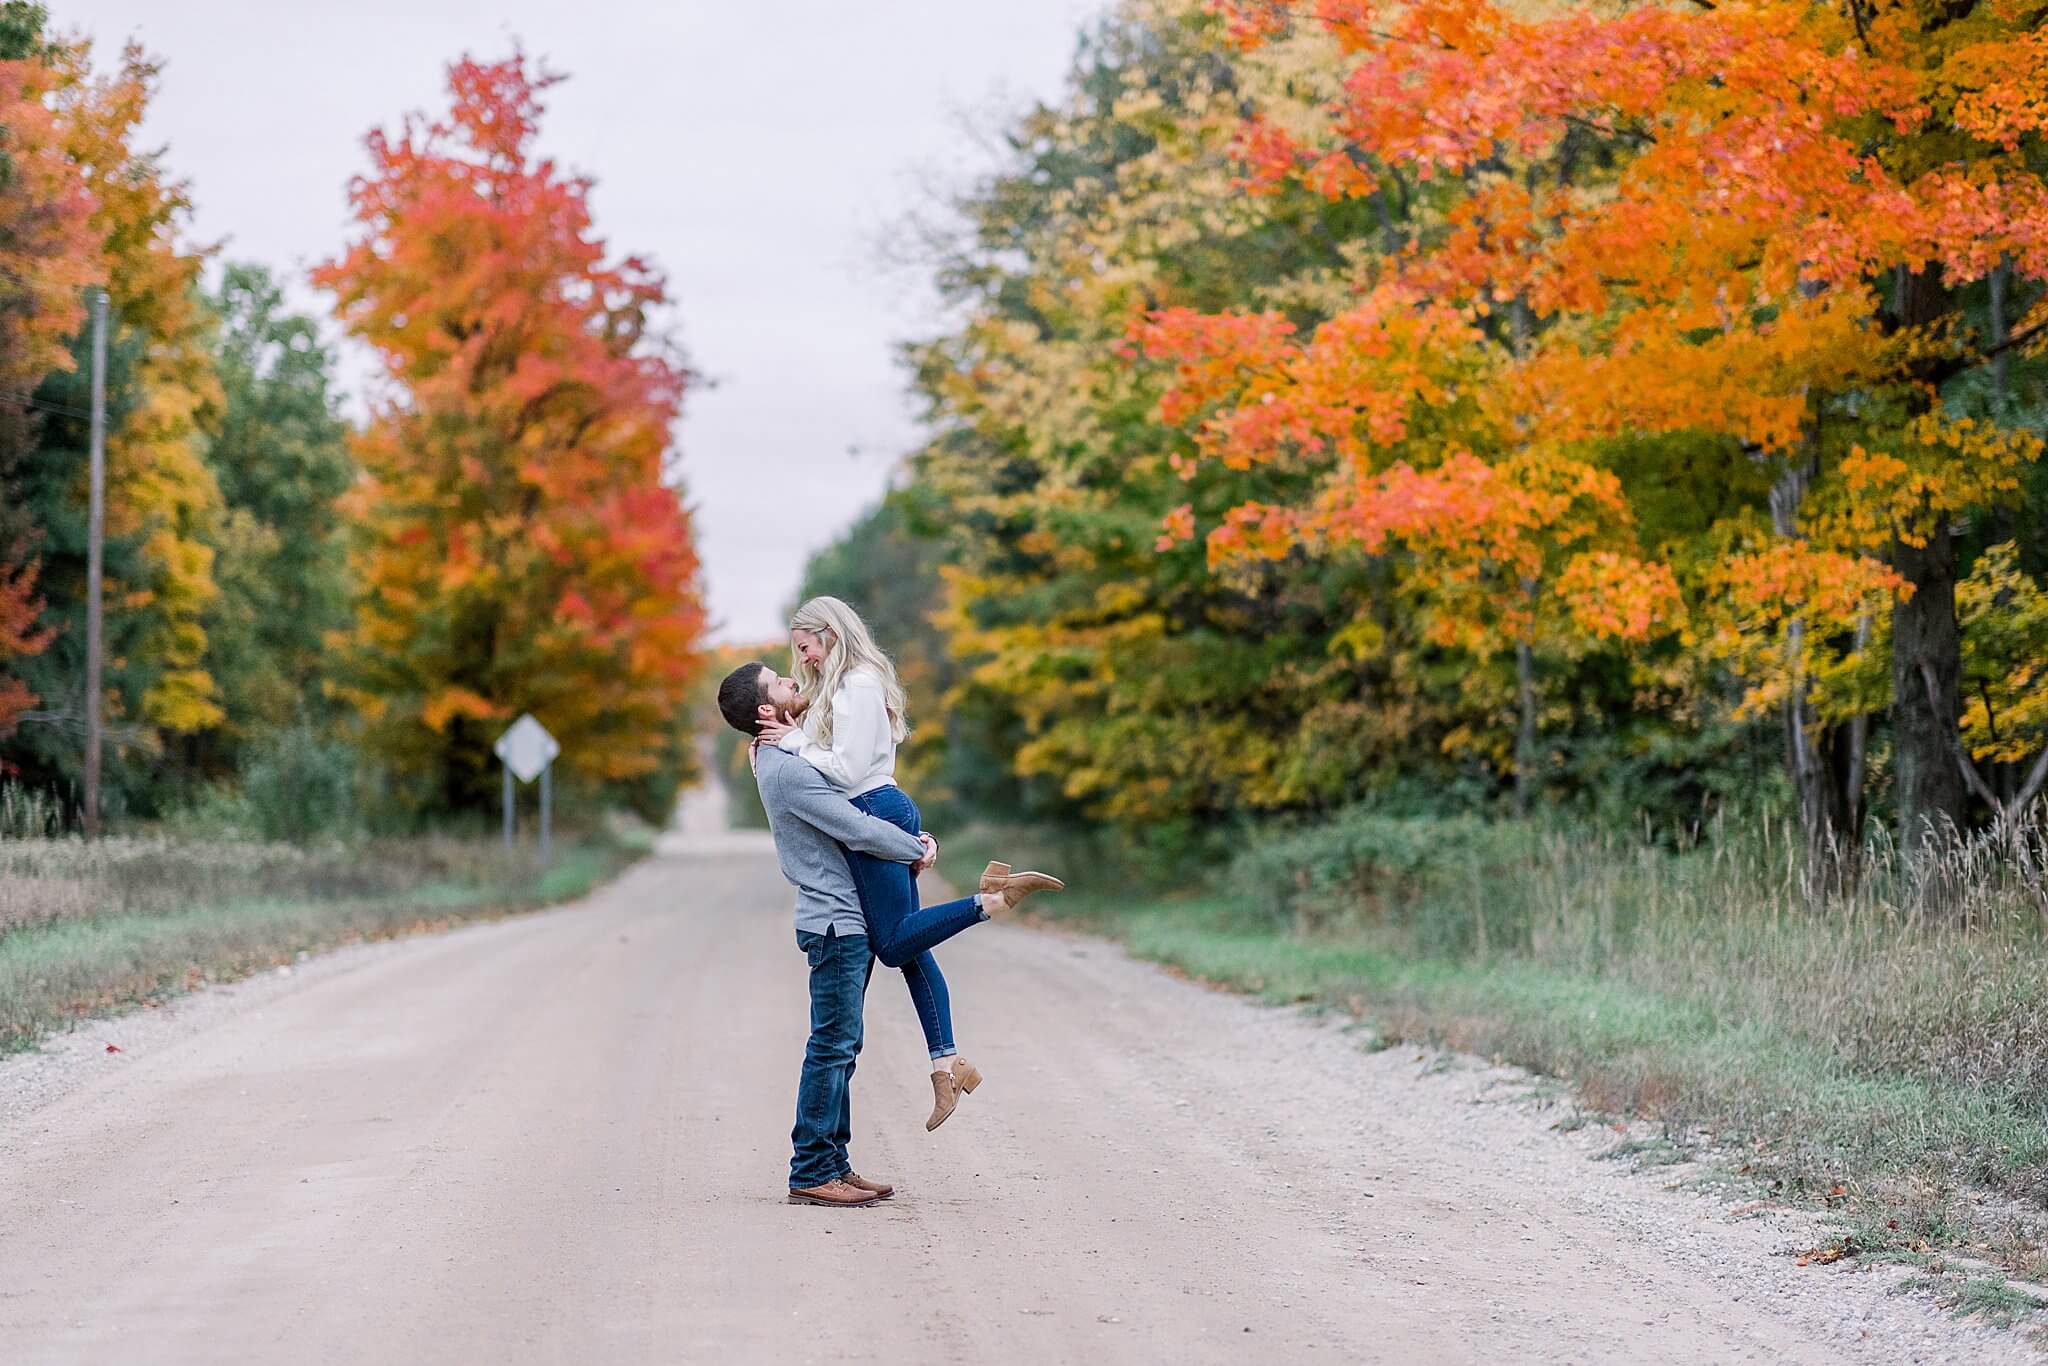 Groom lifts bride along colorful fall road during M22 Fall Engagement Session in Northern Michigan.